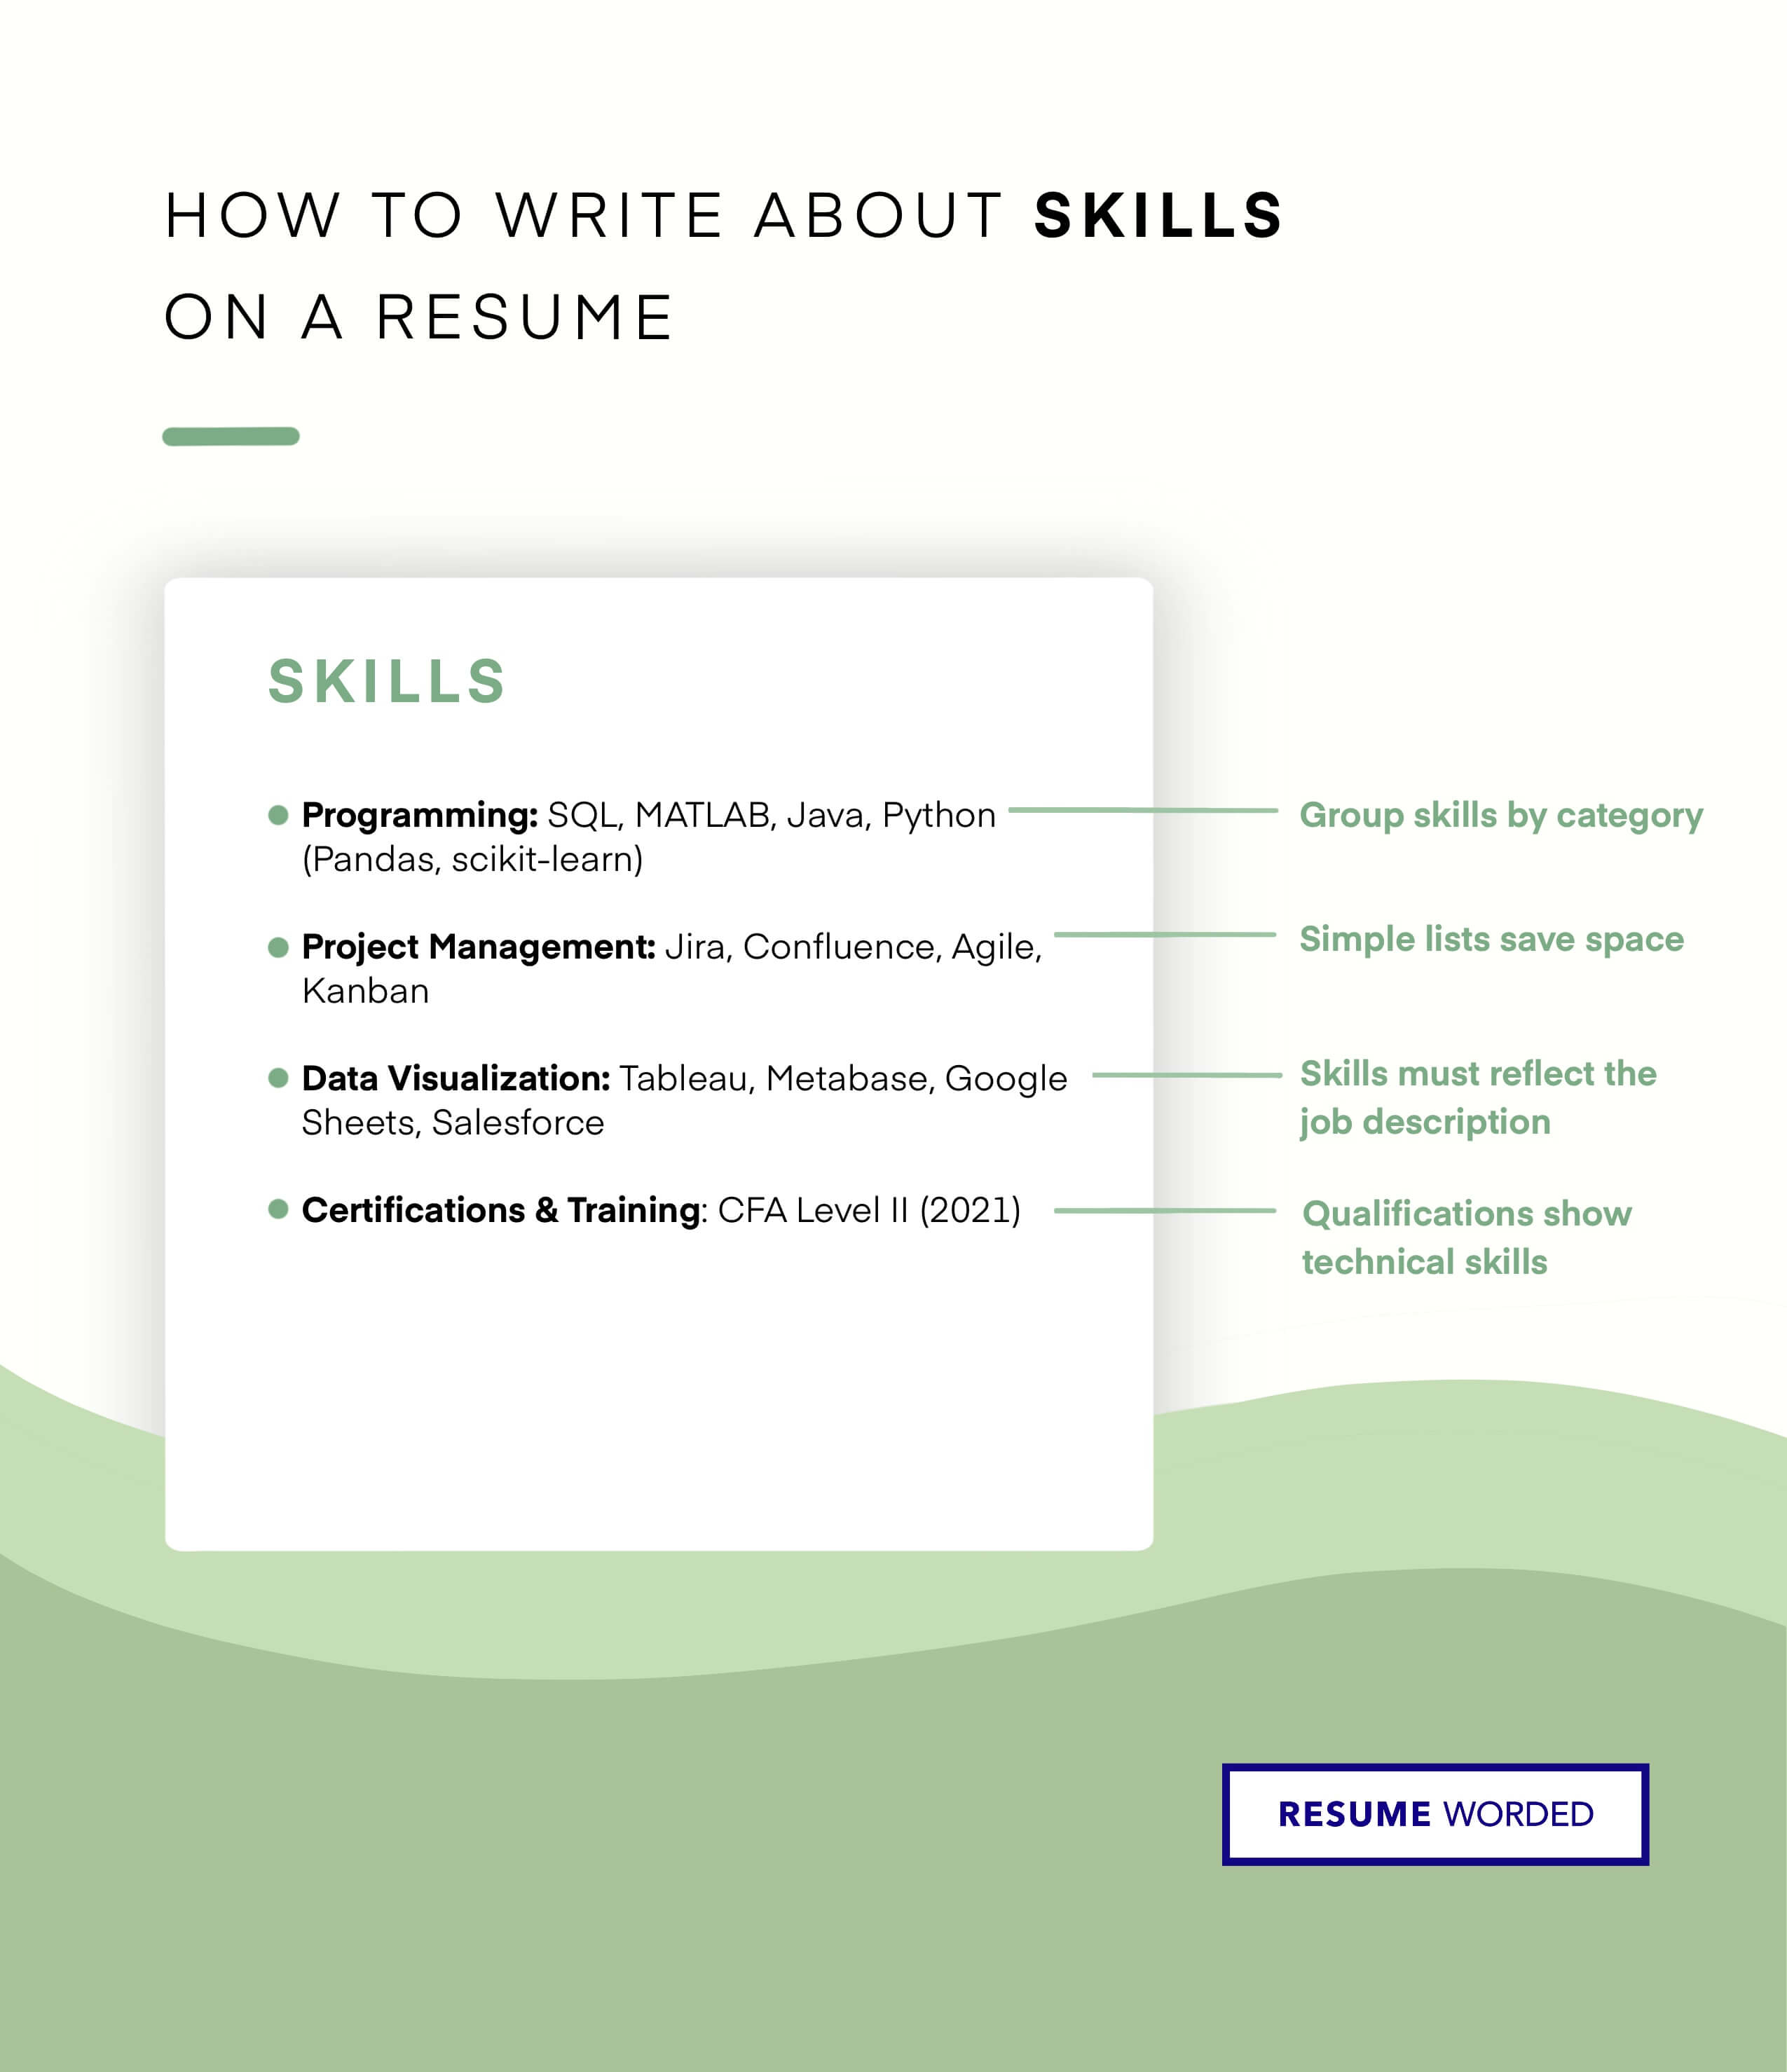 Use subheadings in your skills section to quickly separate your hard skills into different categories